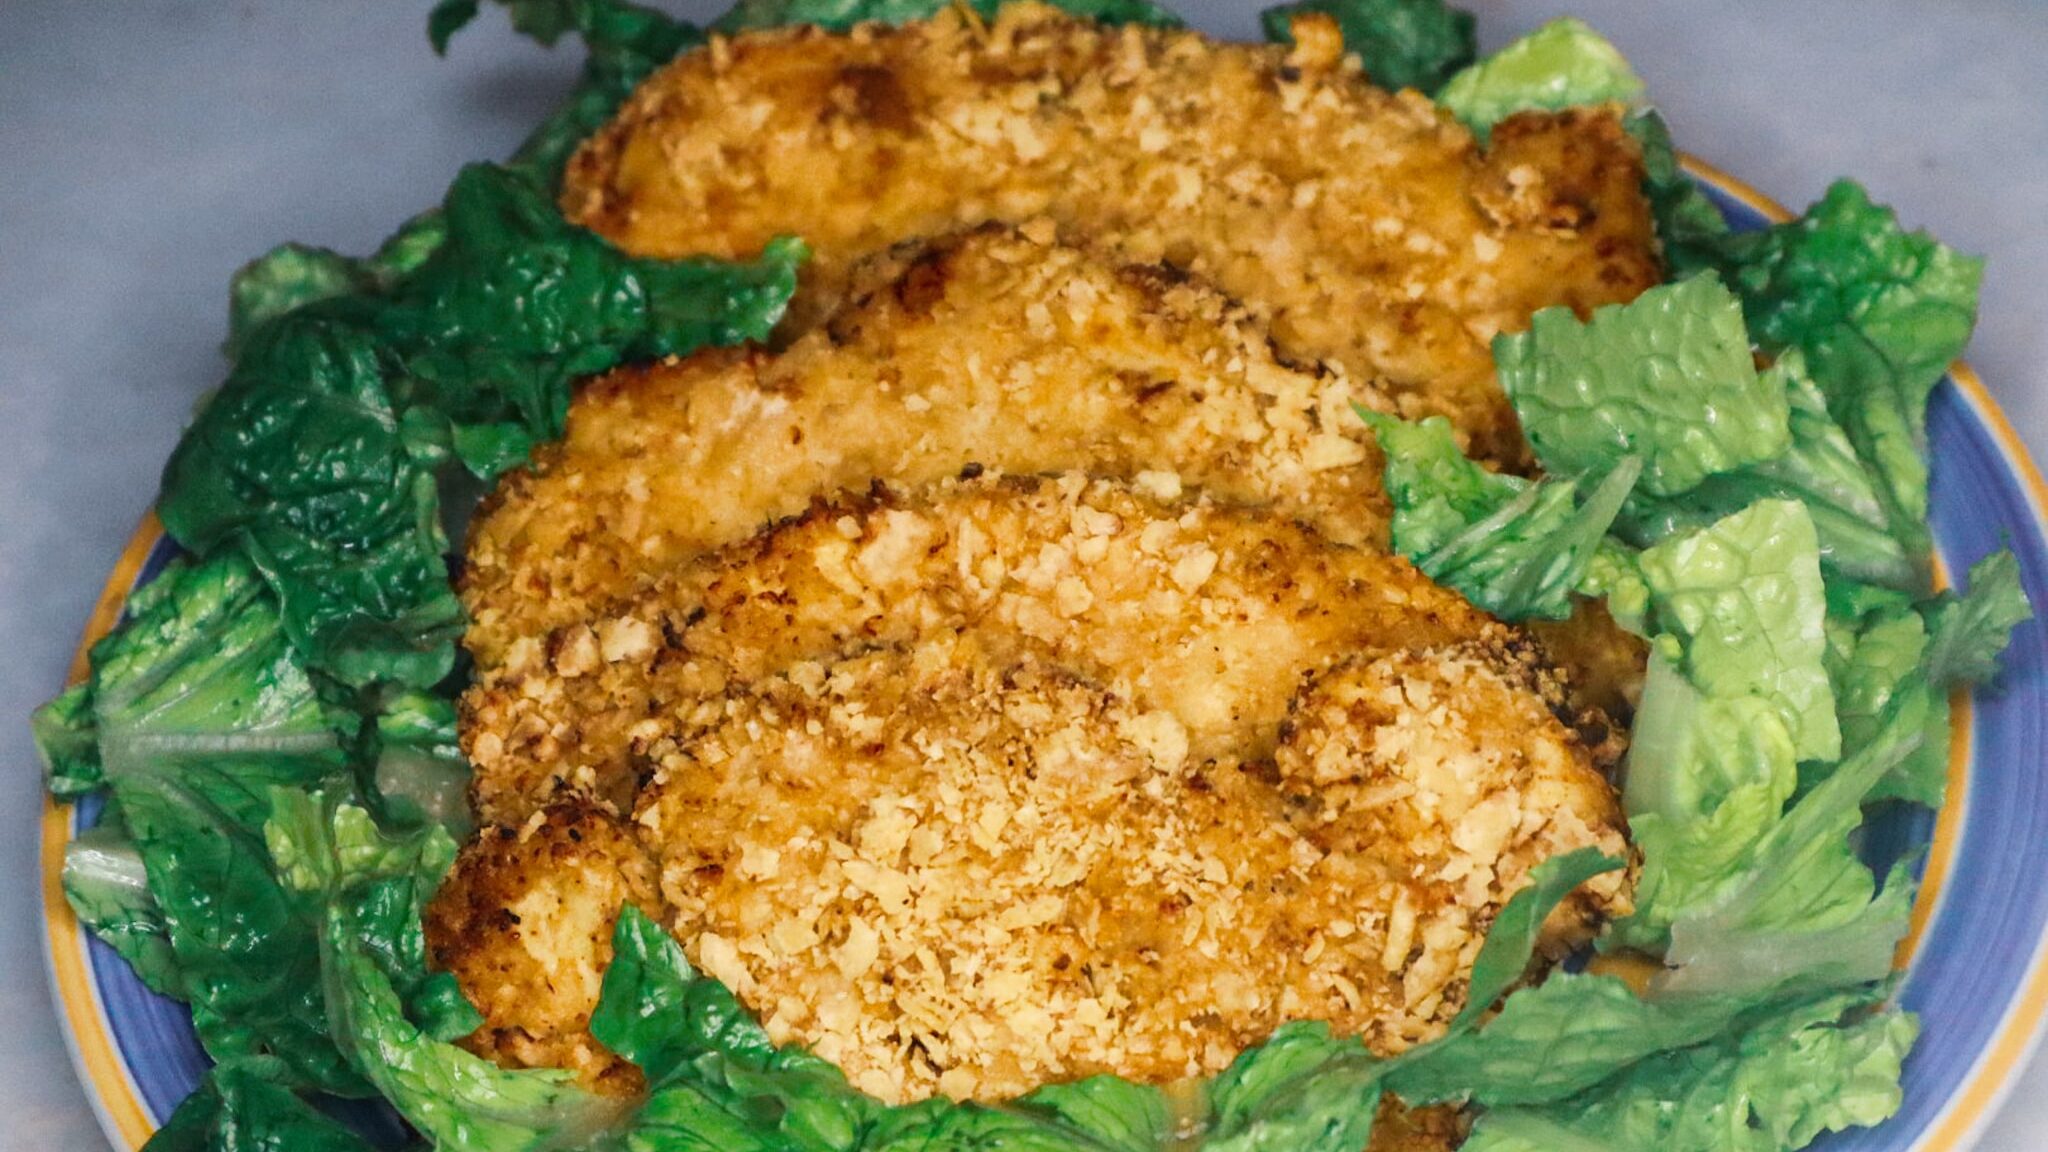 Air fryer sour cream and onion chicken on a plate garnished with Romaine lettuce.